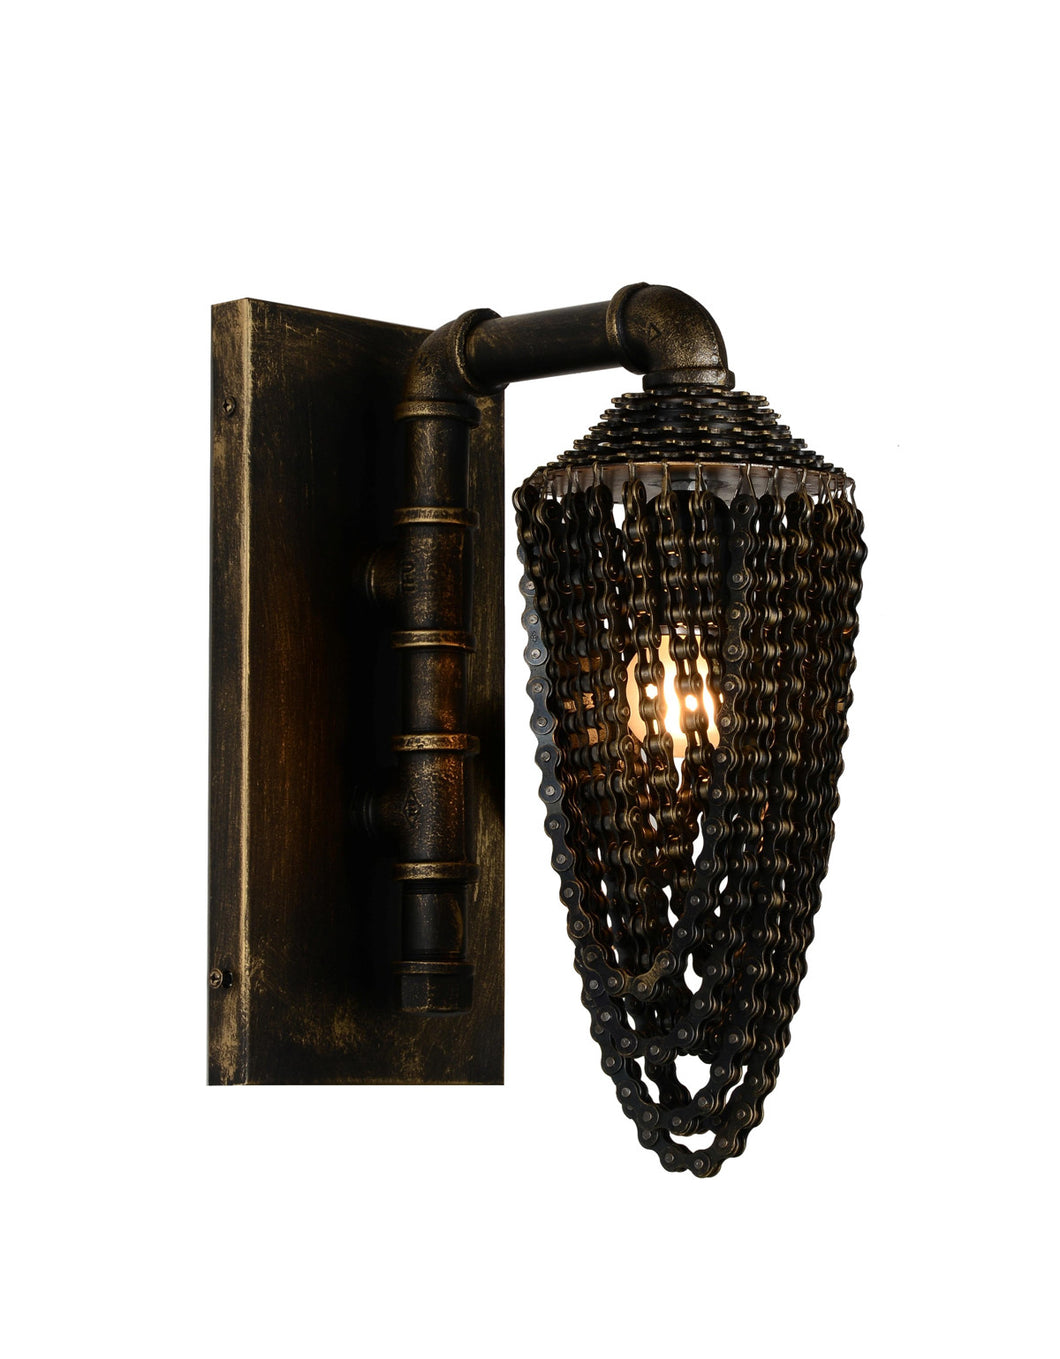 1 Light Wall Sconce with Blackened Bronze finish